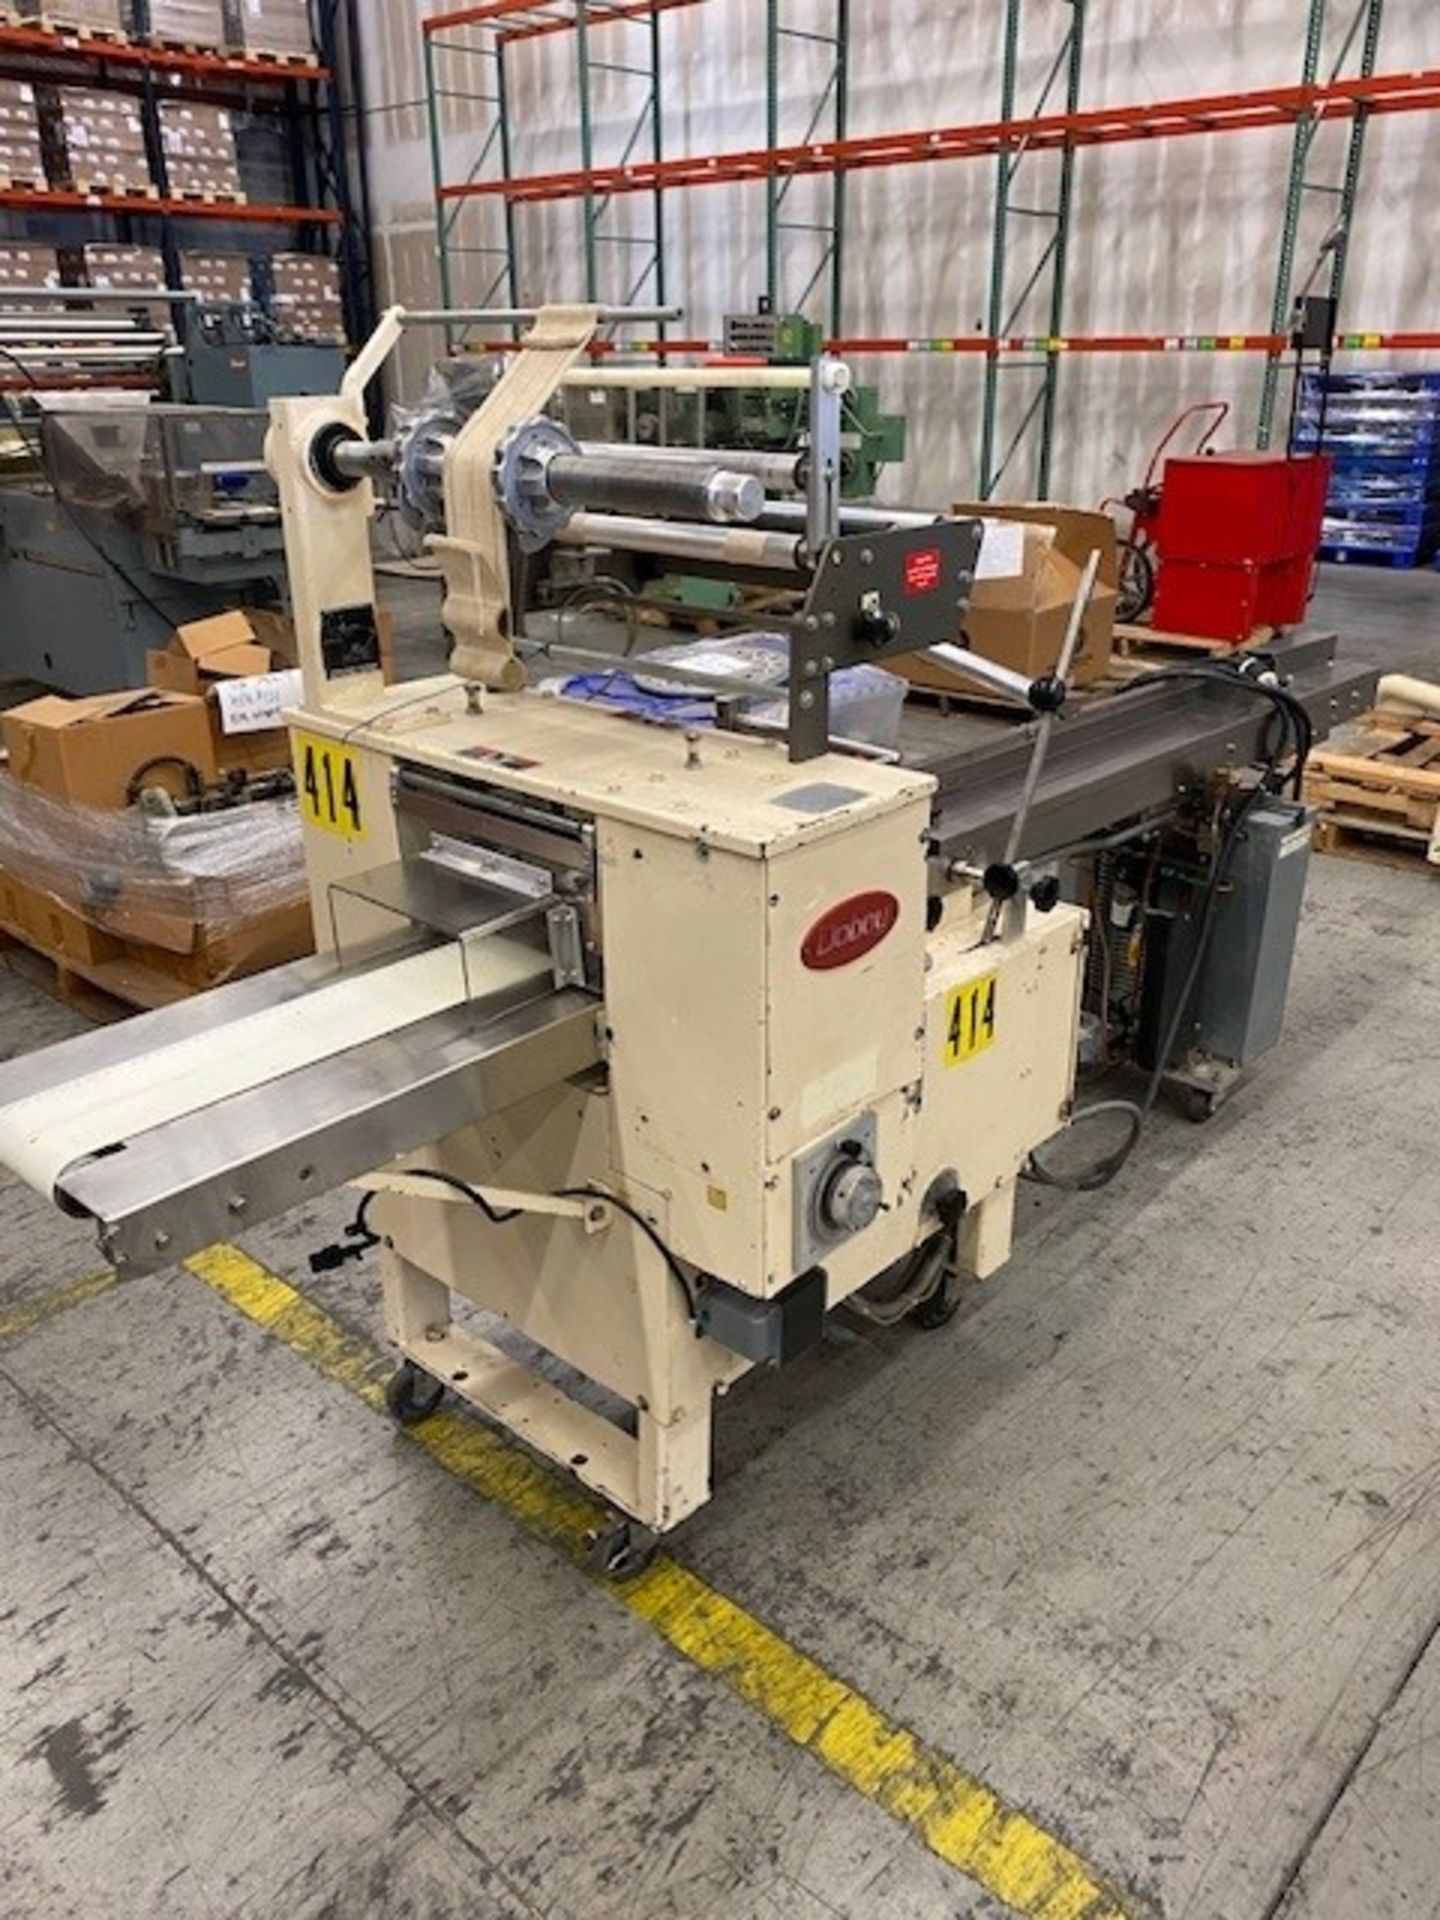 Doboy Scott II horizontal flow wrapper serial number 8723953 built new in 1987 with 1-up cutting